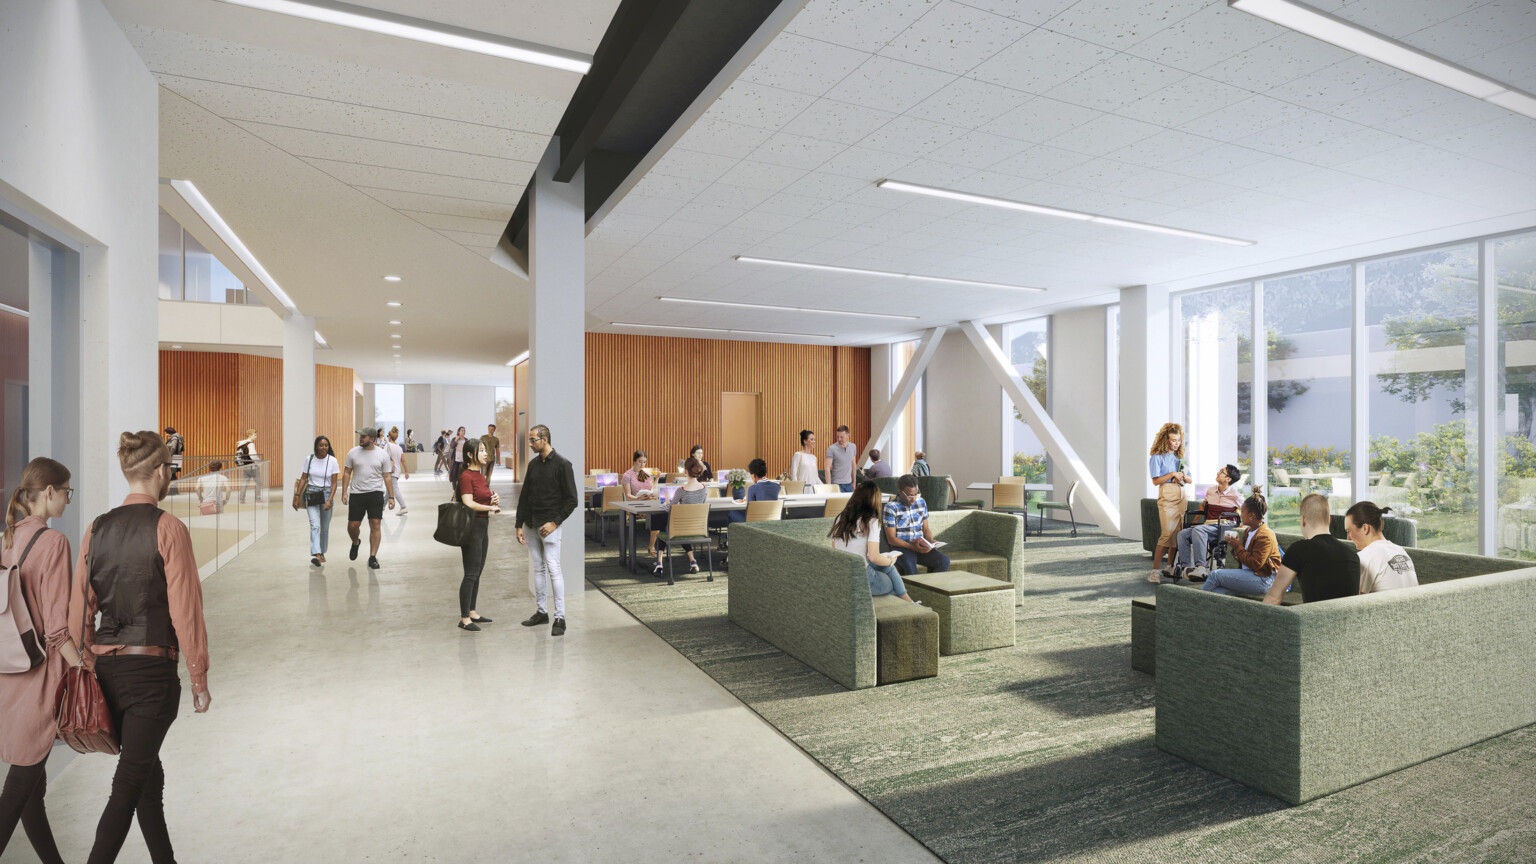 ​The design includes a large, covered balcony on the third floor, which will enable students to sit outside and breathe fresh air while they study or collaborate